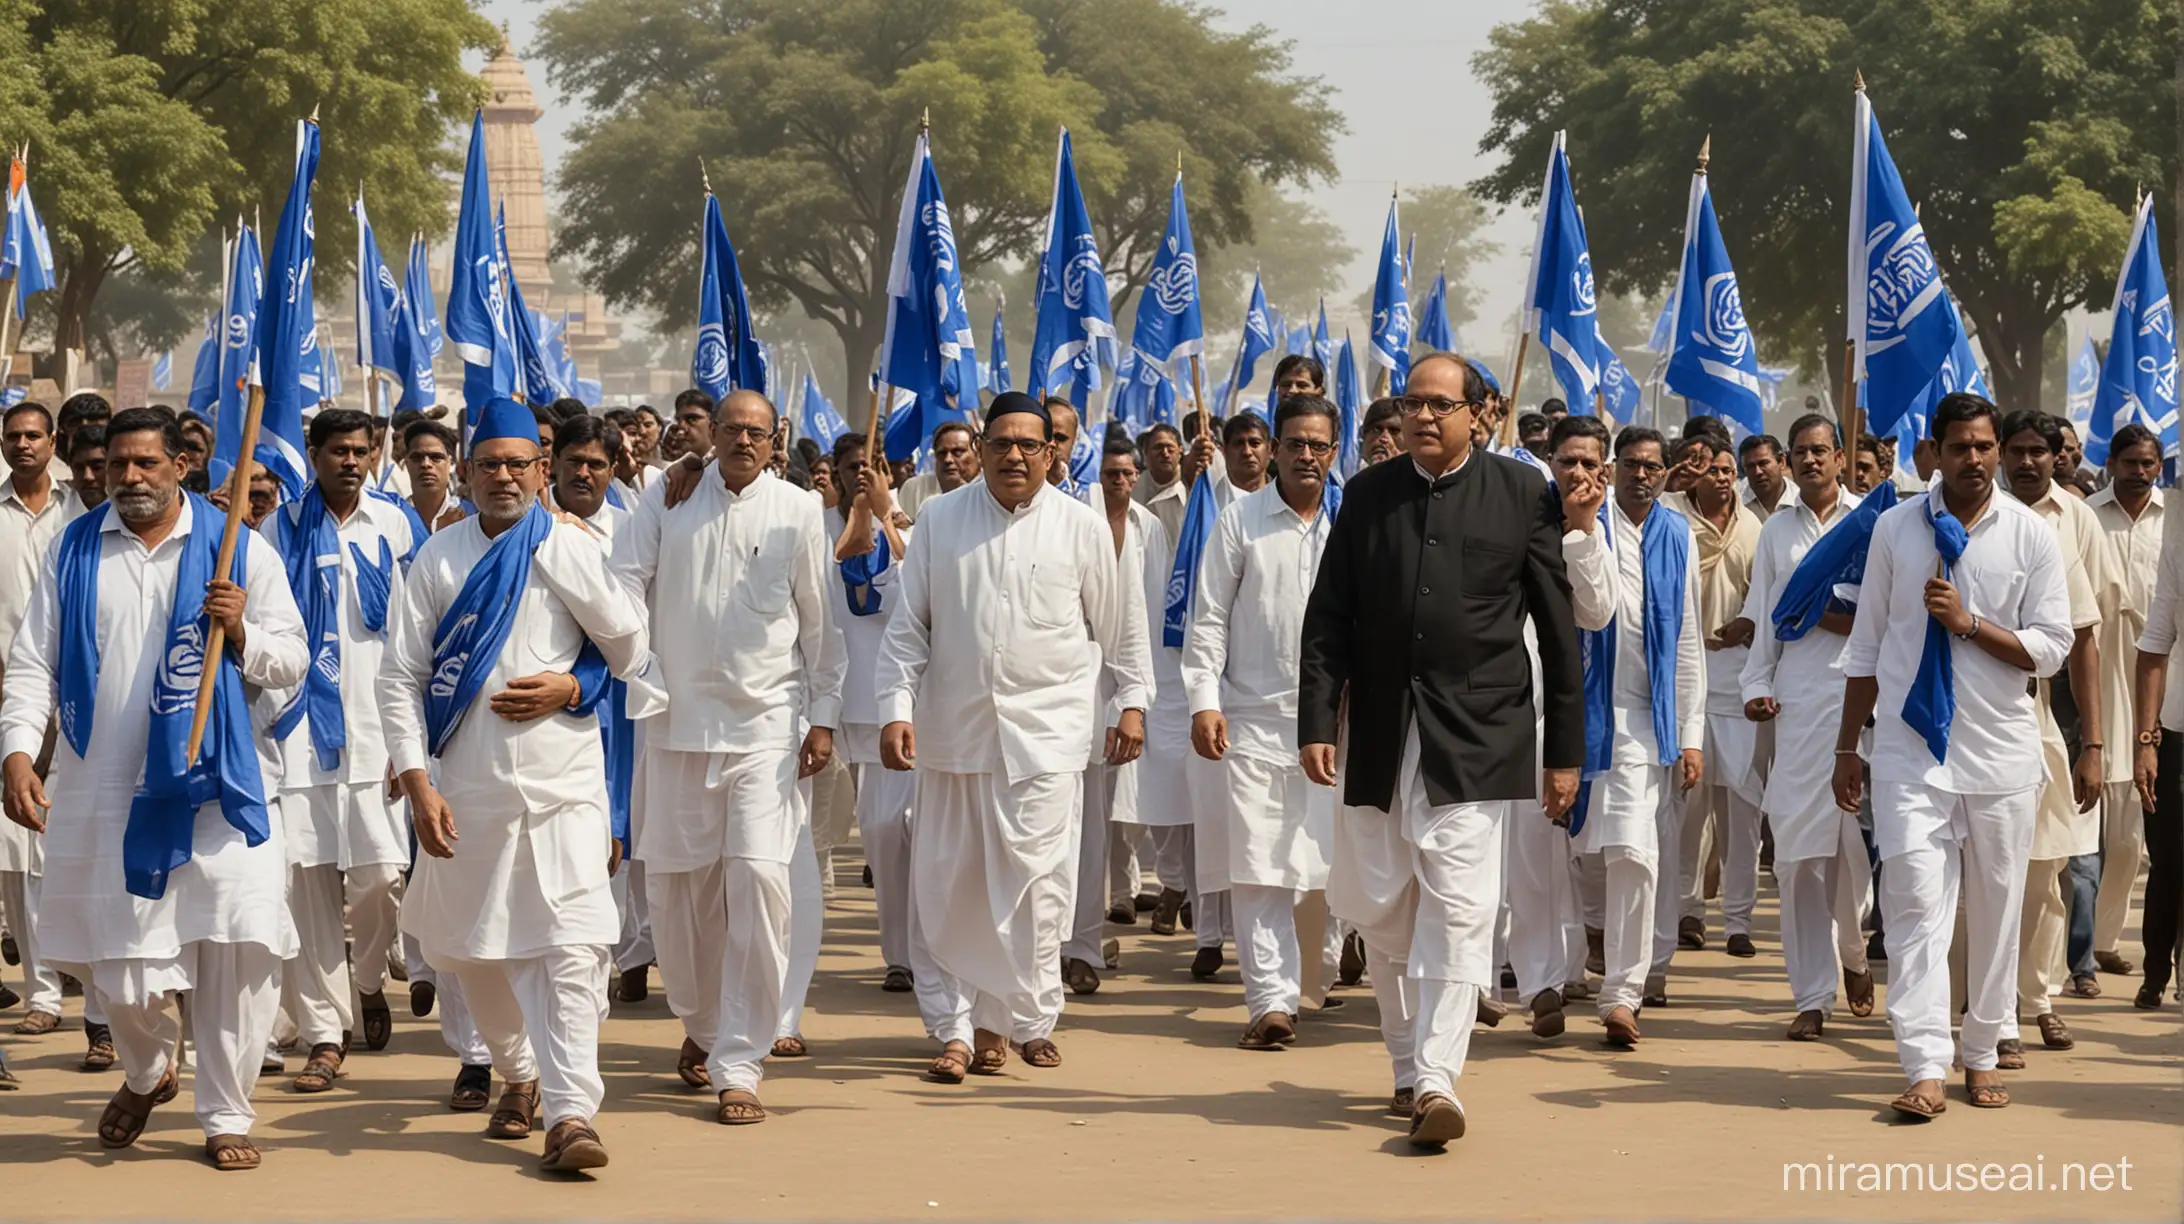 Dr Babasaheb Bhimrao Ambedkar Leading Dalit Protest with Blue Flags near Temple